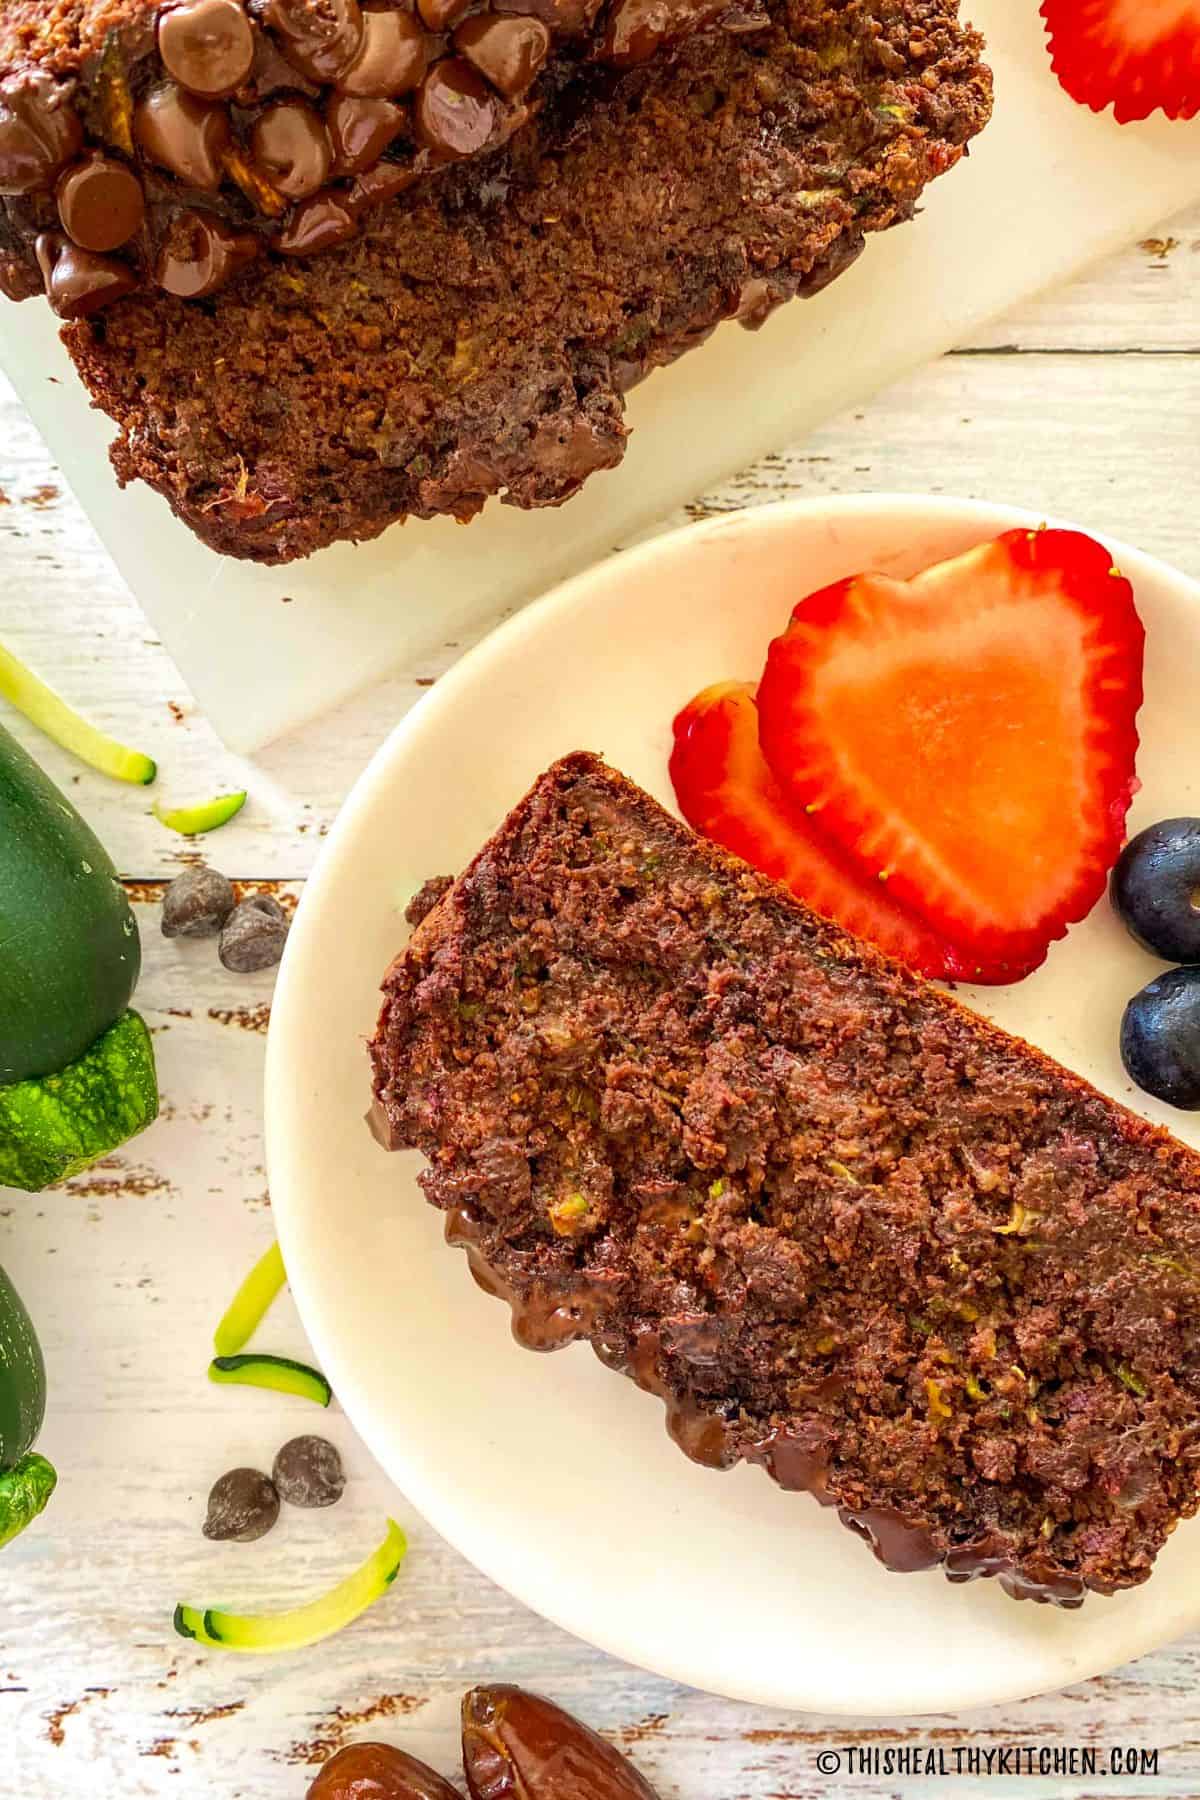 Slice of chocolate zucchini bread in plate with strawberries and blueberries beside it.